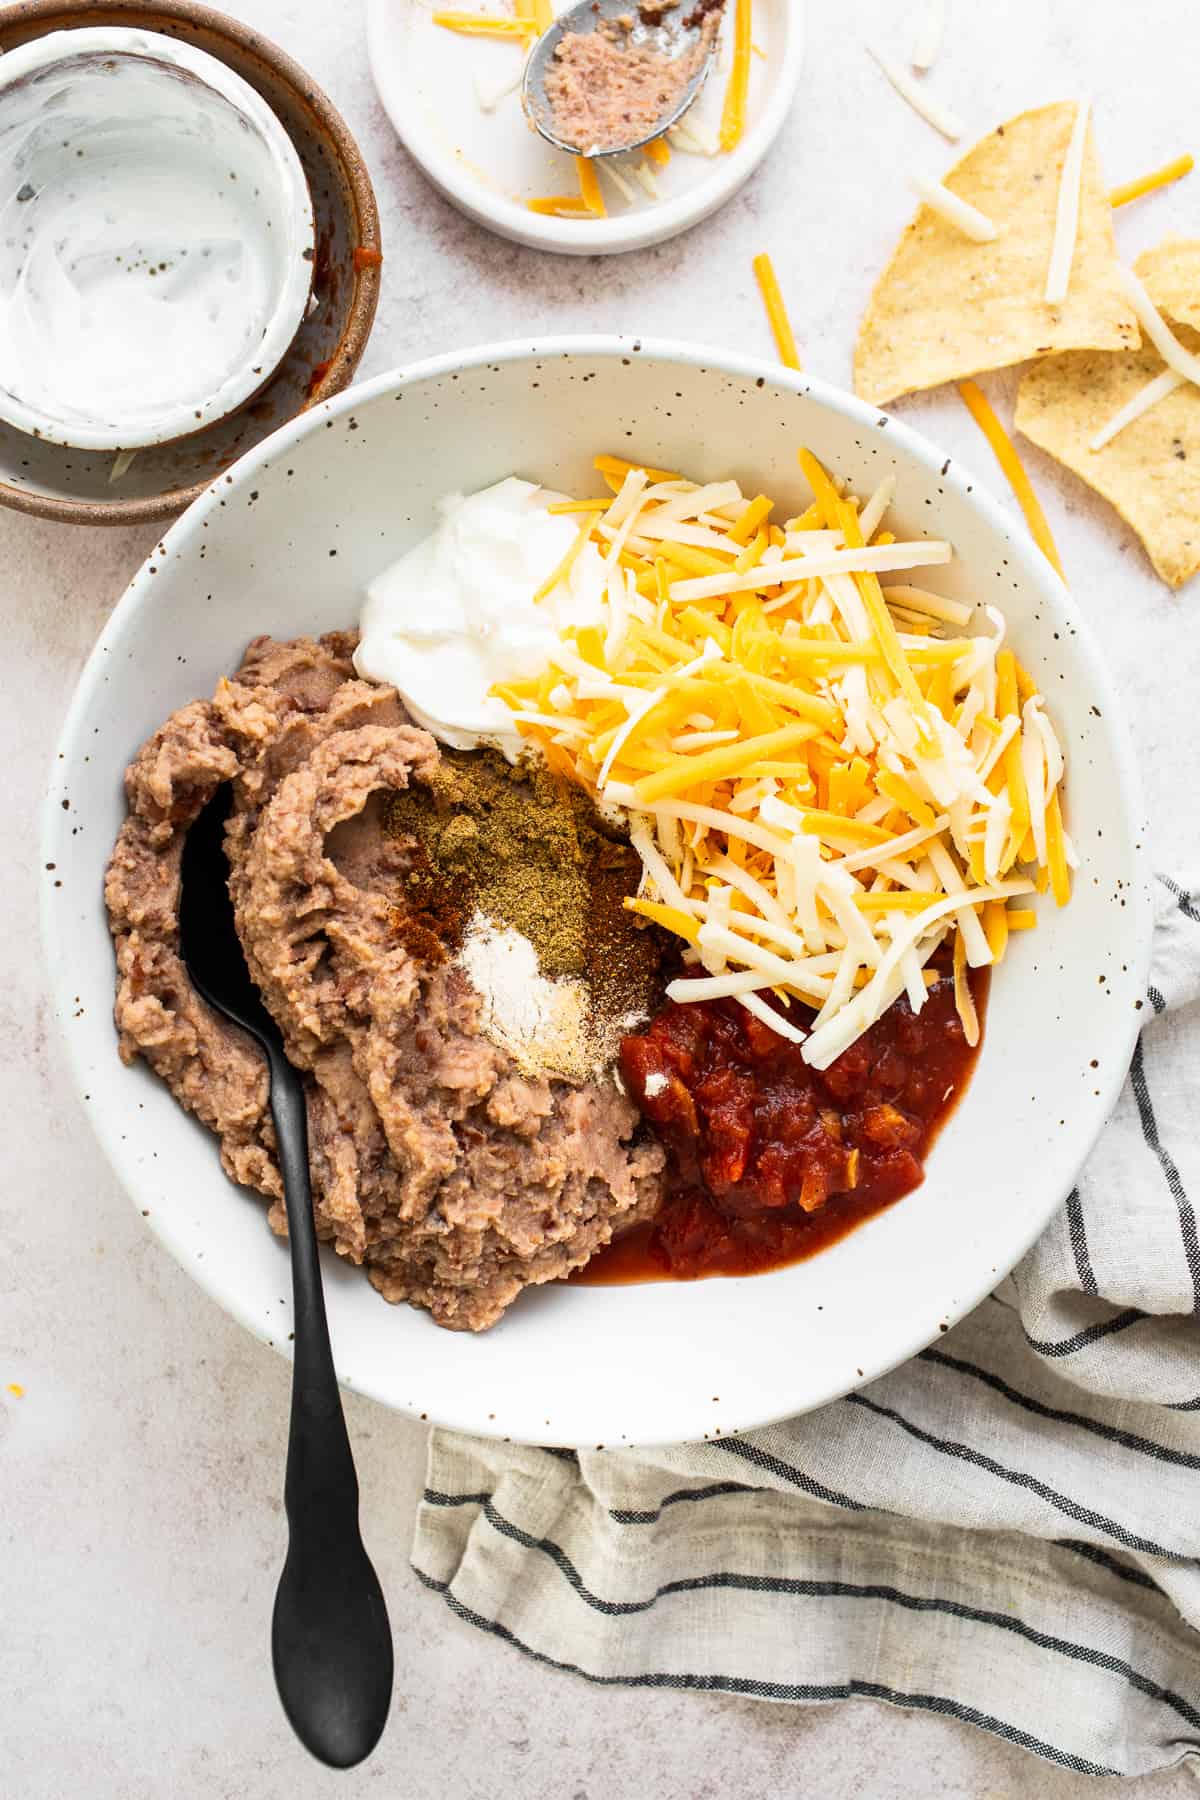 Refried beans, chunky salsa, shredded cheese, sour cream, and seasonings in a mixing bowl.